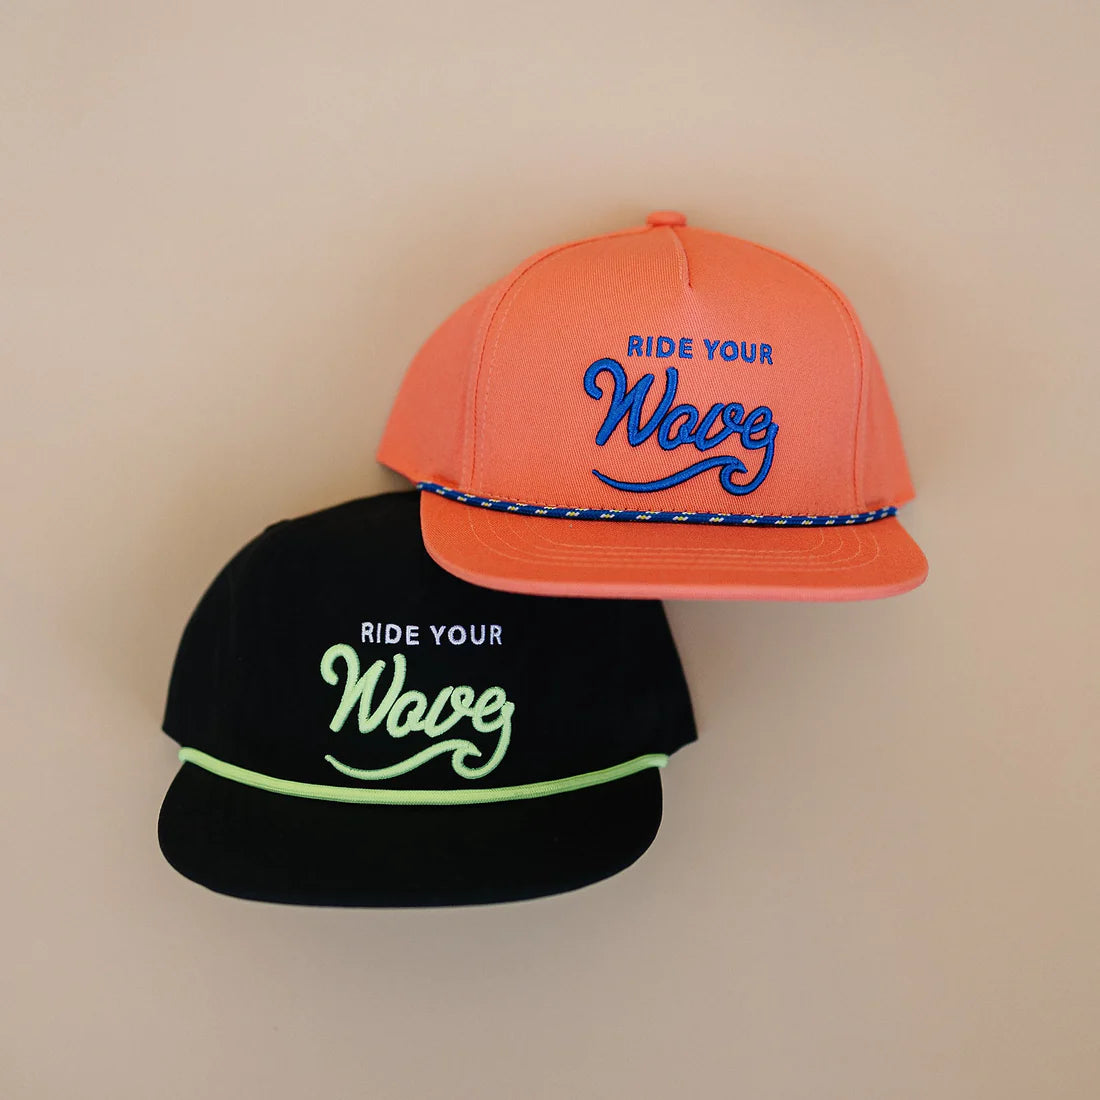 Cash and Co Ride the Wave Hat - Coral or Black